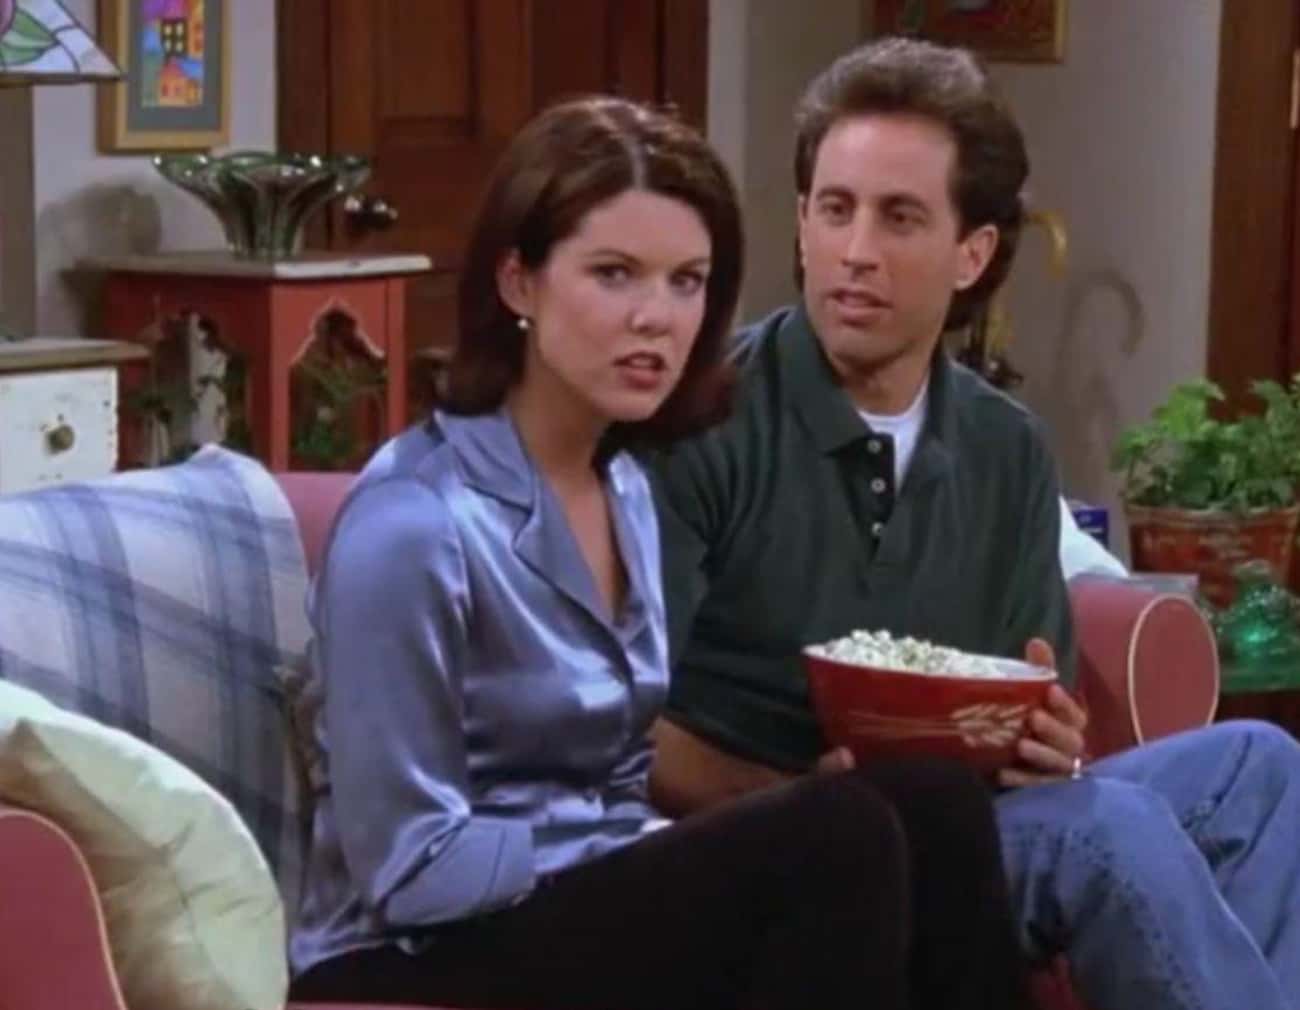 'Seinfeld' Has An Episode Where Jerry Is Determined To Get Onto His Girlfriend’s Speed Dial